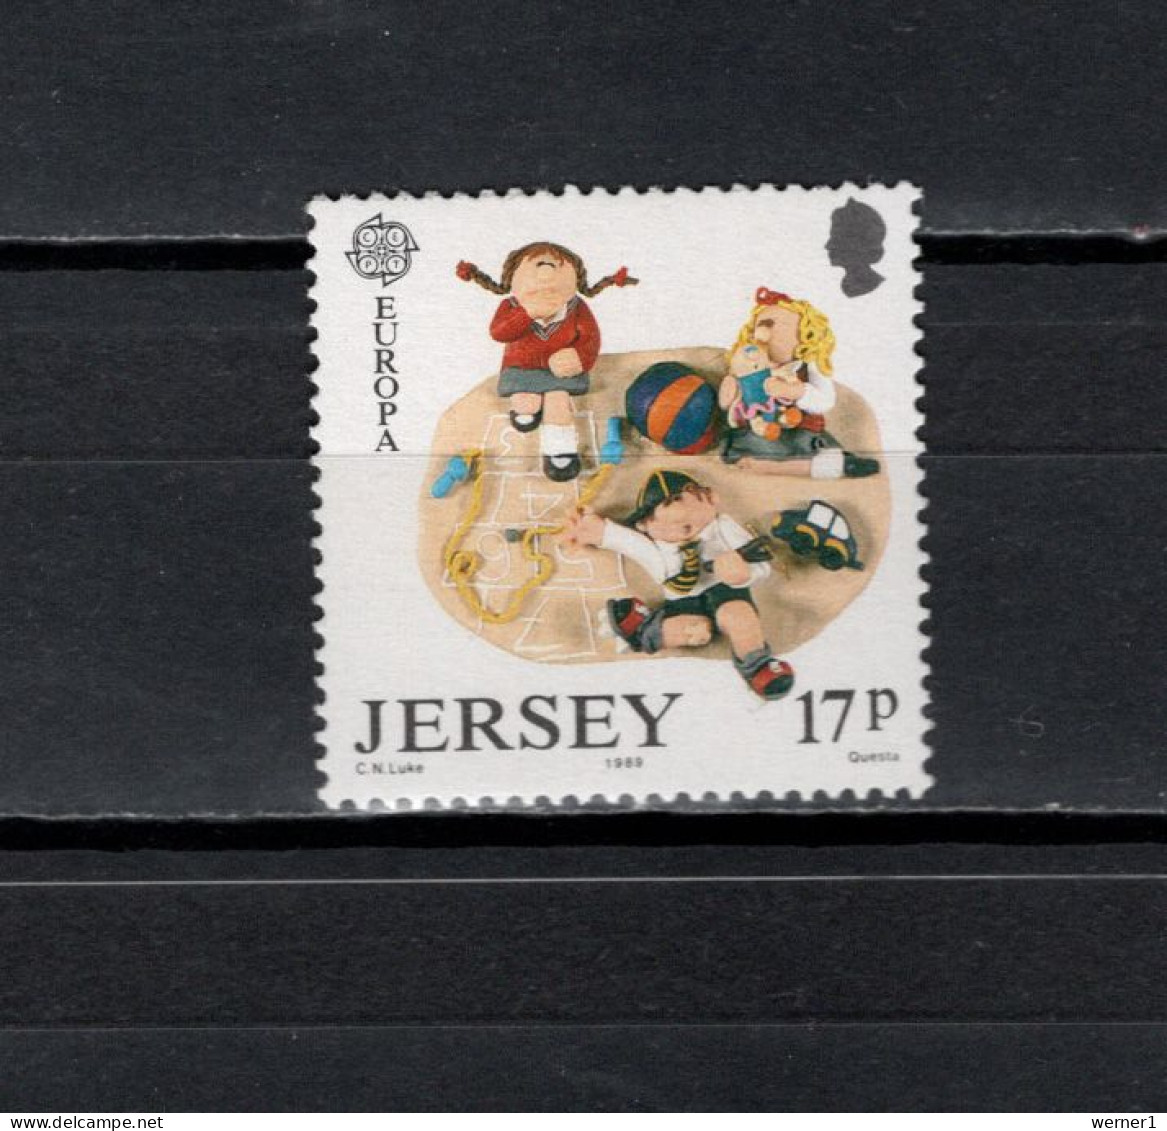 Jersey 1989 Football Soccer, Playing Children Stamp MNH - Unused Stamps